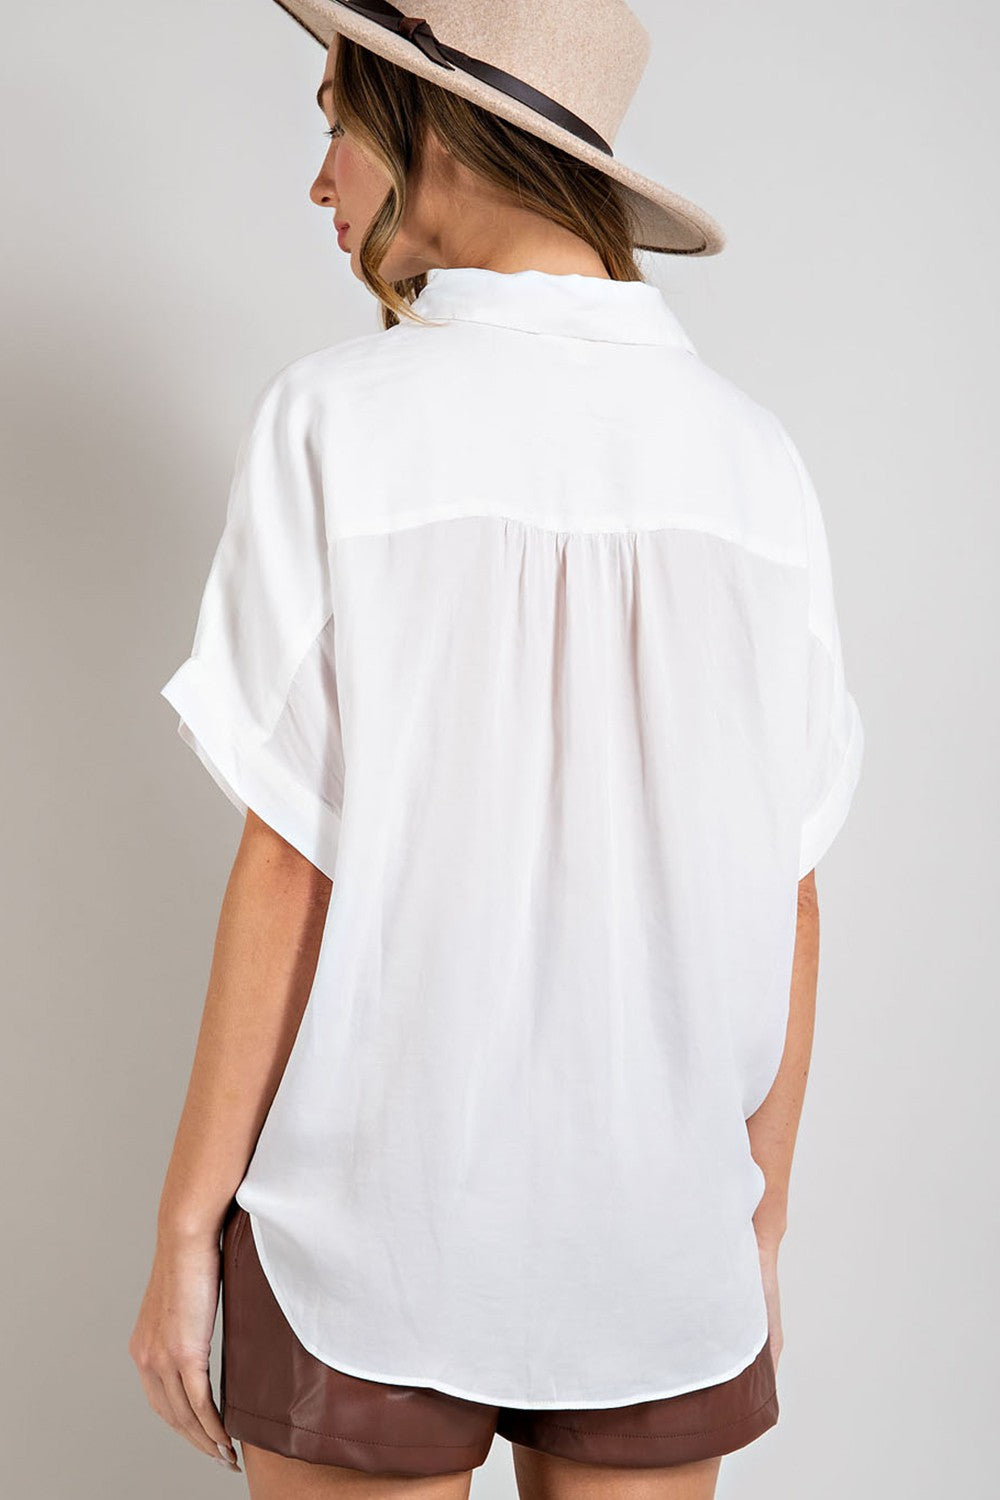 Lola White Blouse - KC Outfitter